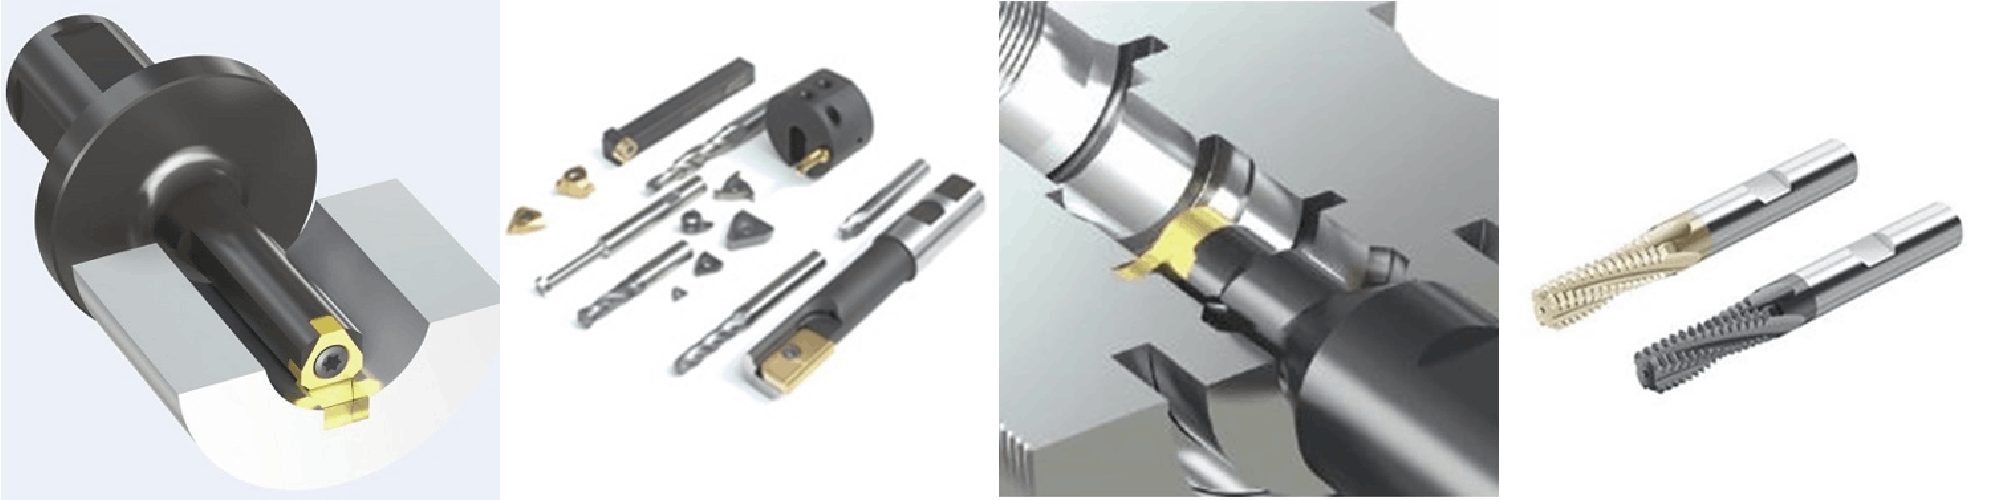 Precision Cutting Tools by Premier Form Tools